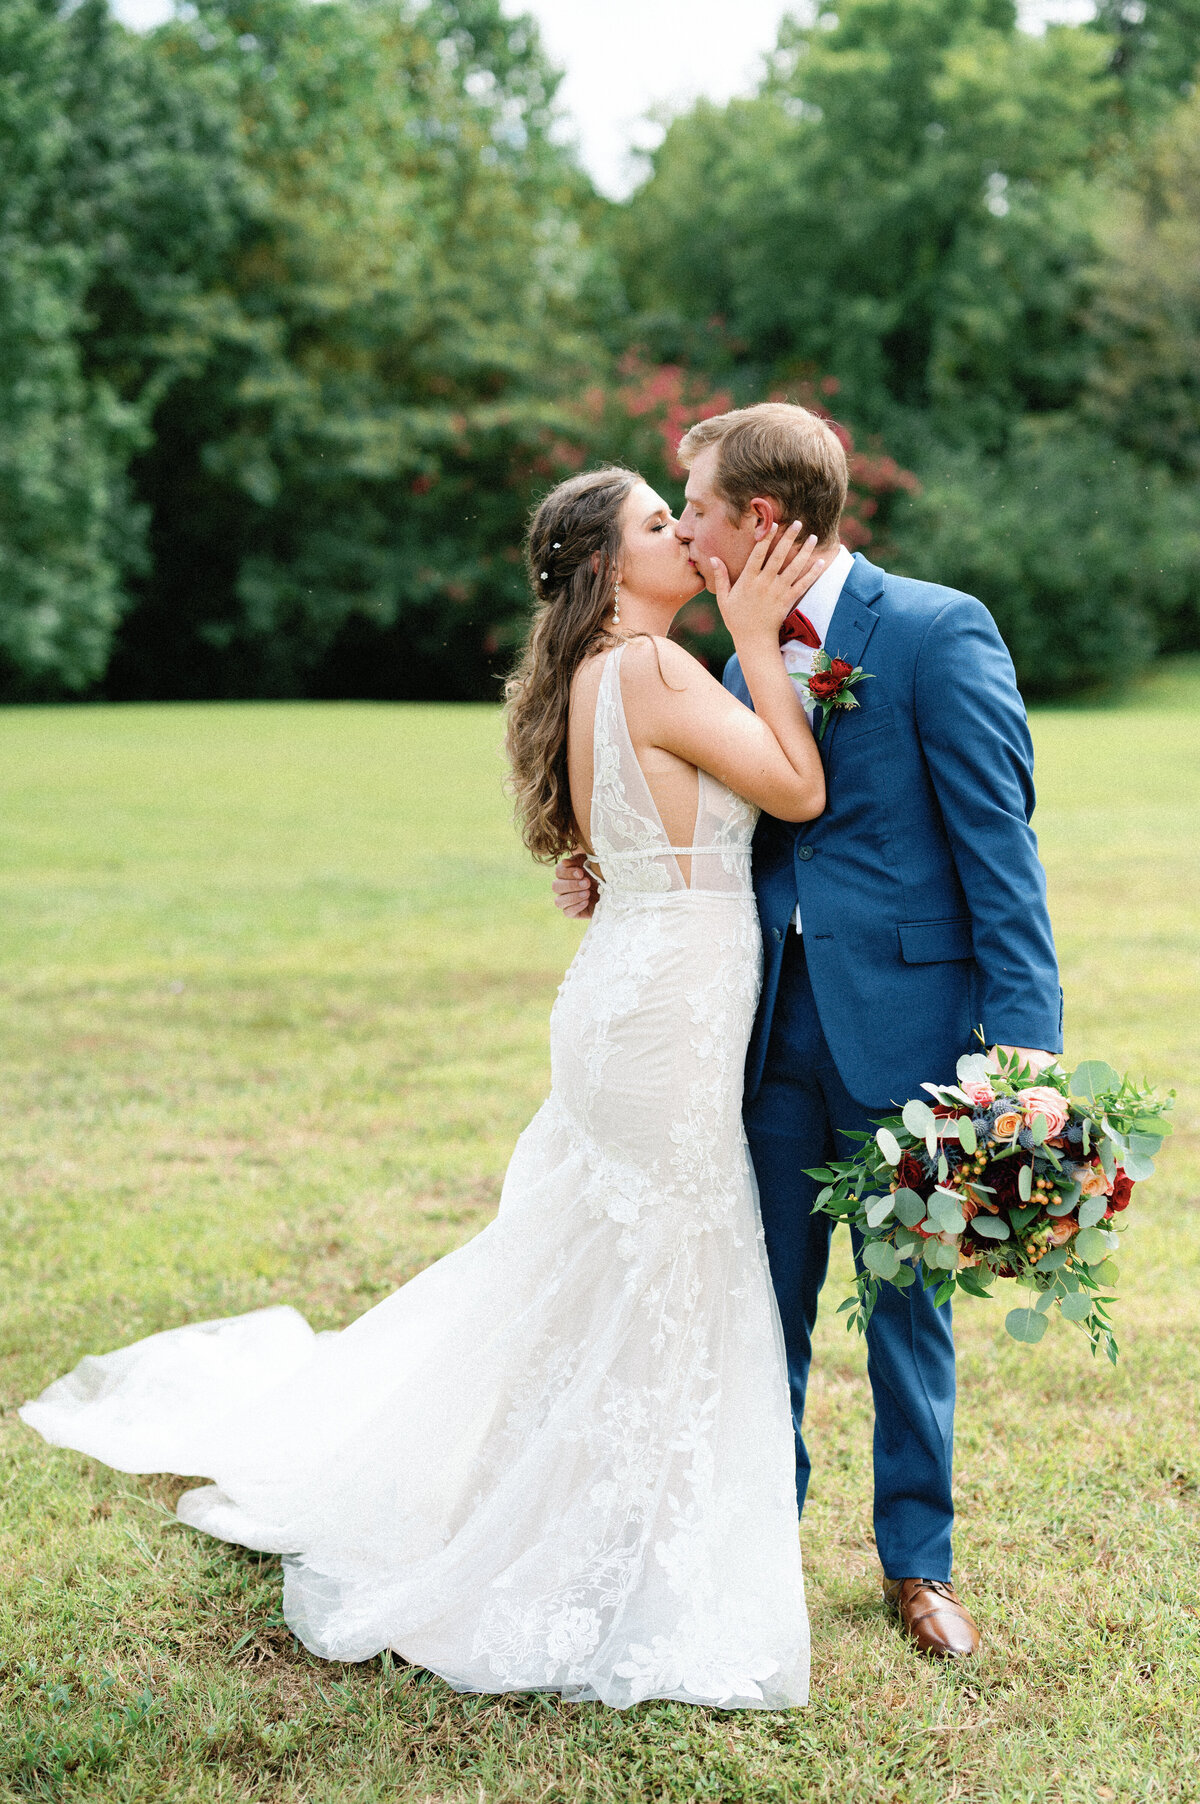 Alaina and Russ - Coopers Cove at Heritage Park - East Tennessee Wedding Photographer - Alaina René photography-969-2